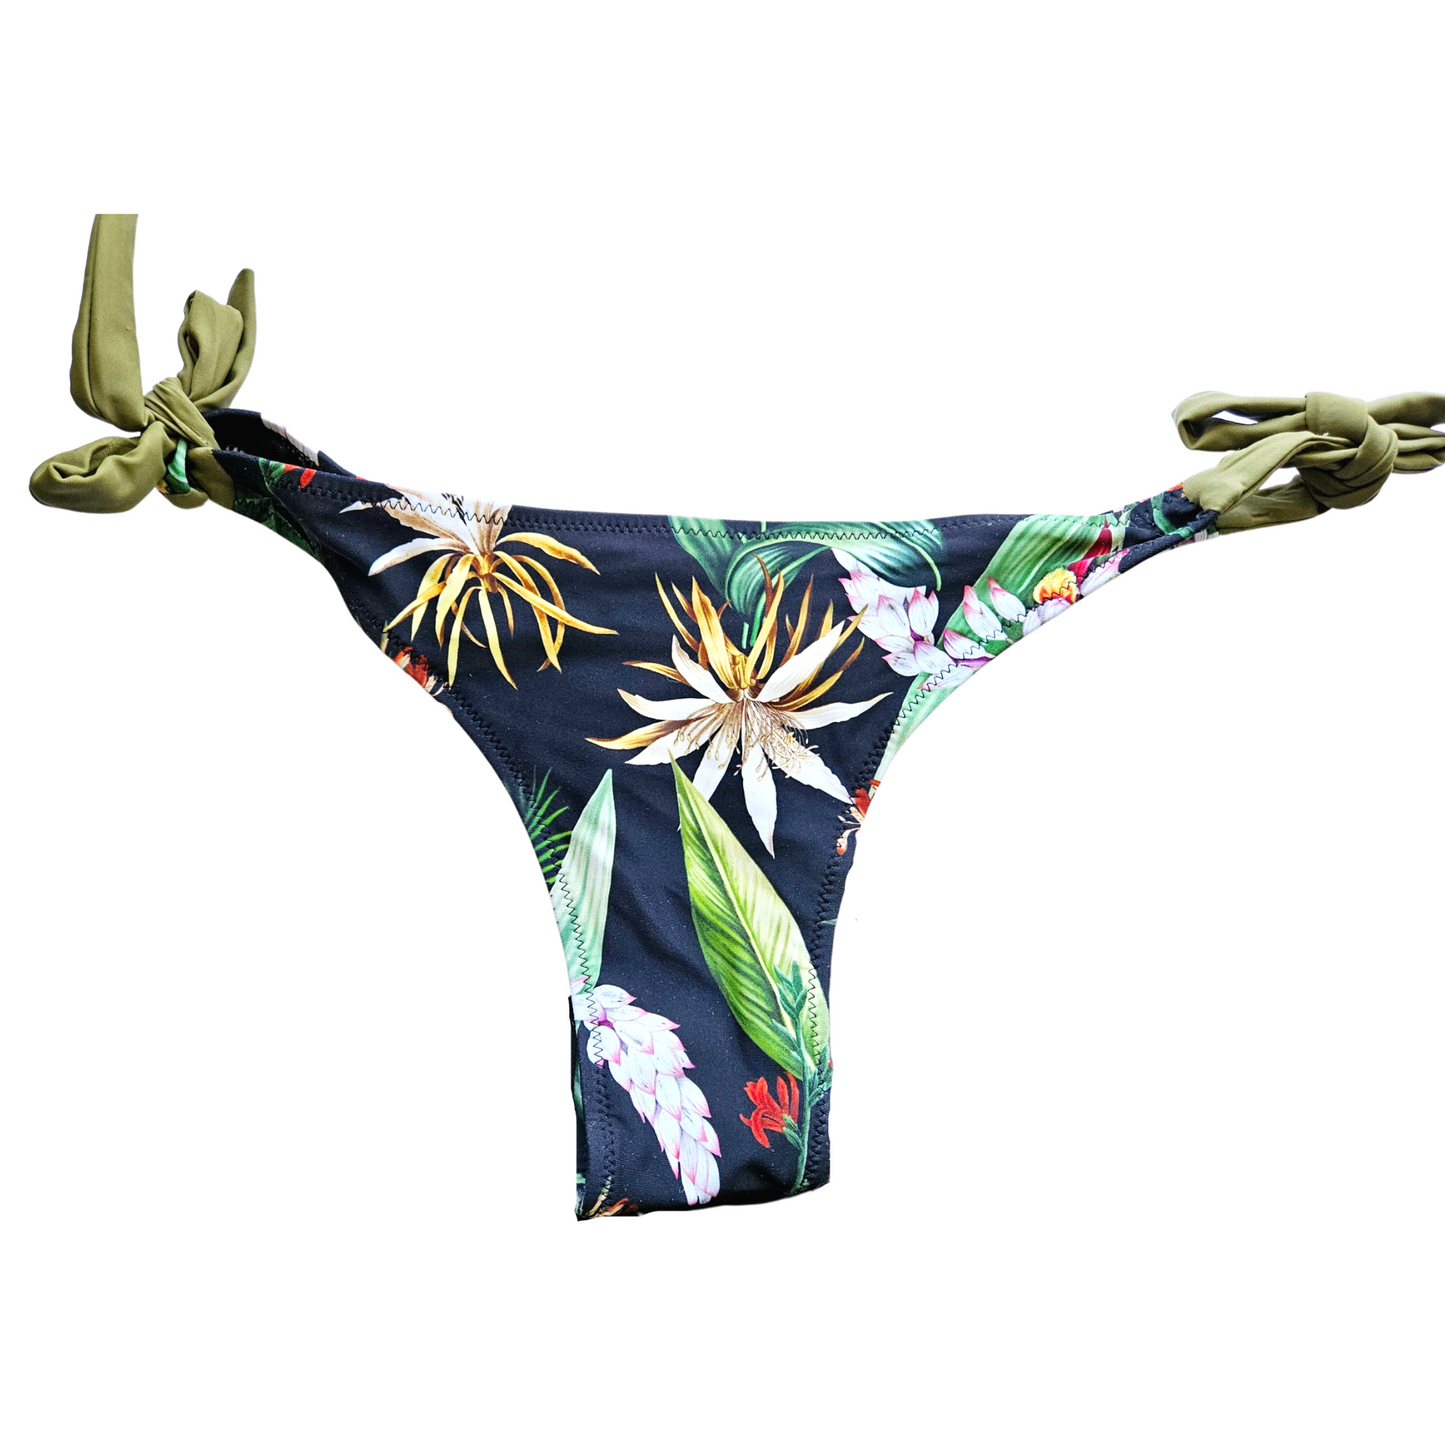 Stylish dark green bikini with a floral design on the top and a thong bottom"